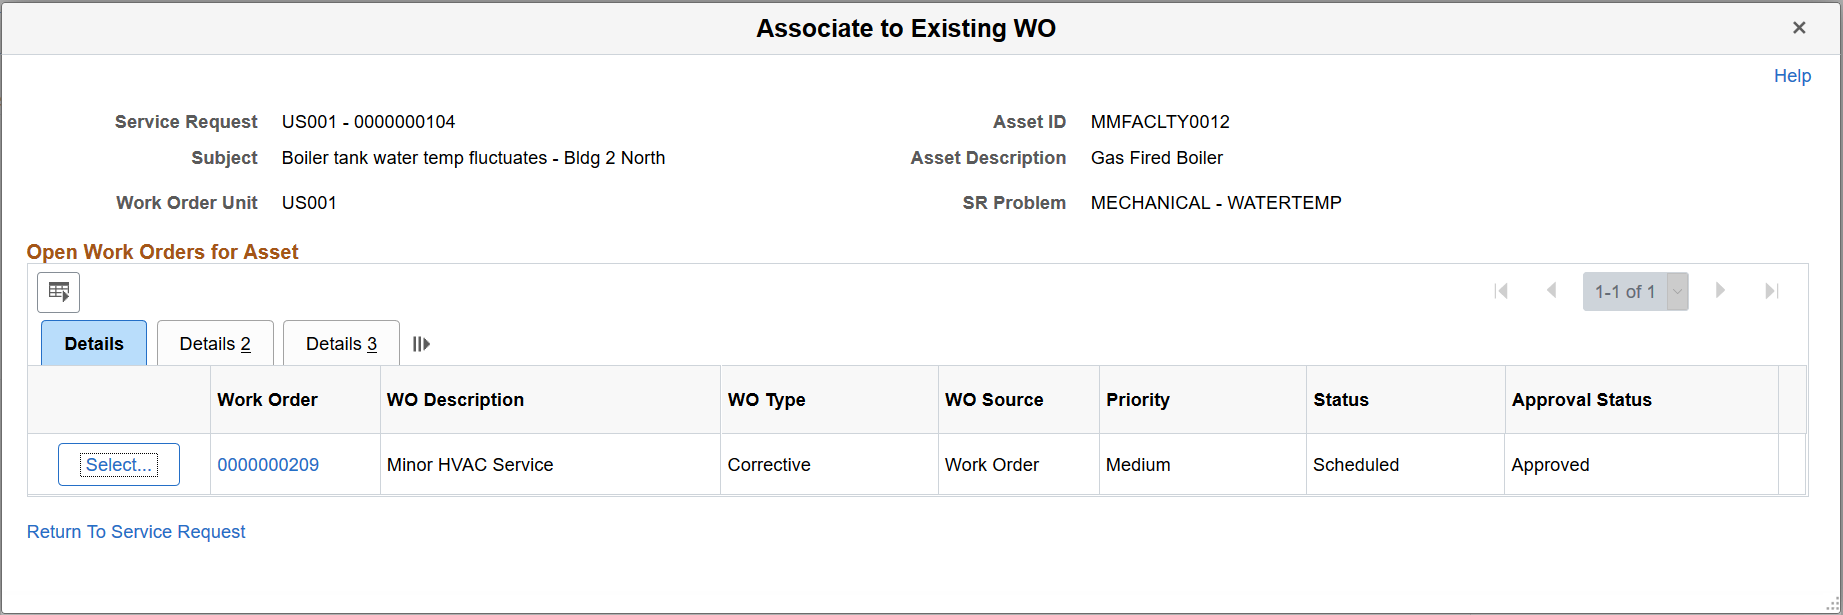 Associate to Existing WO page